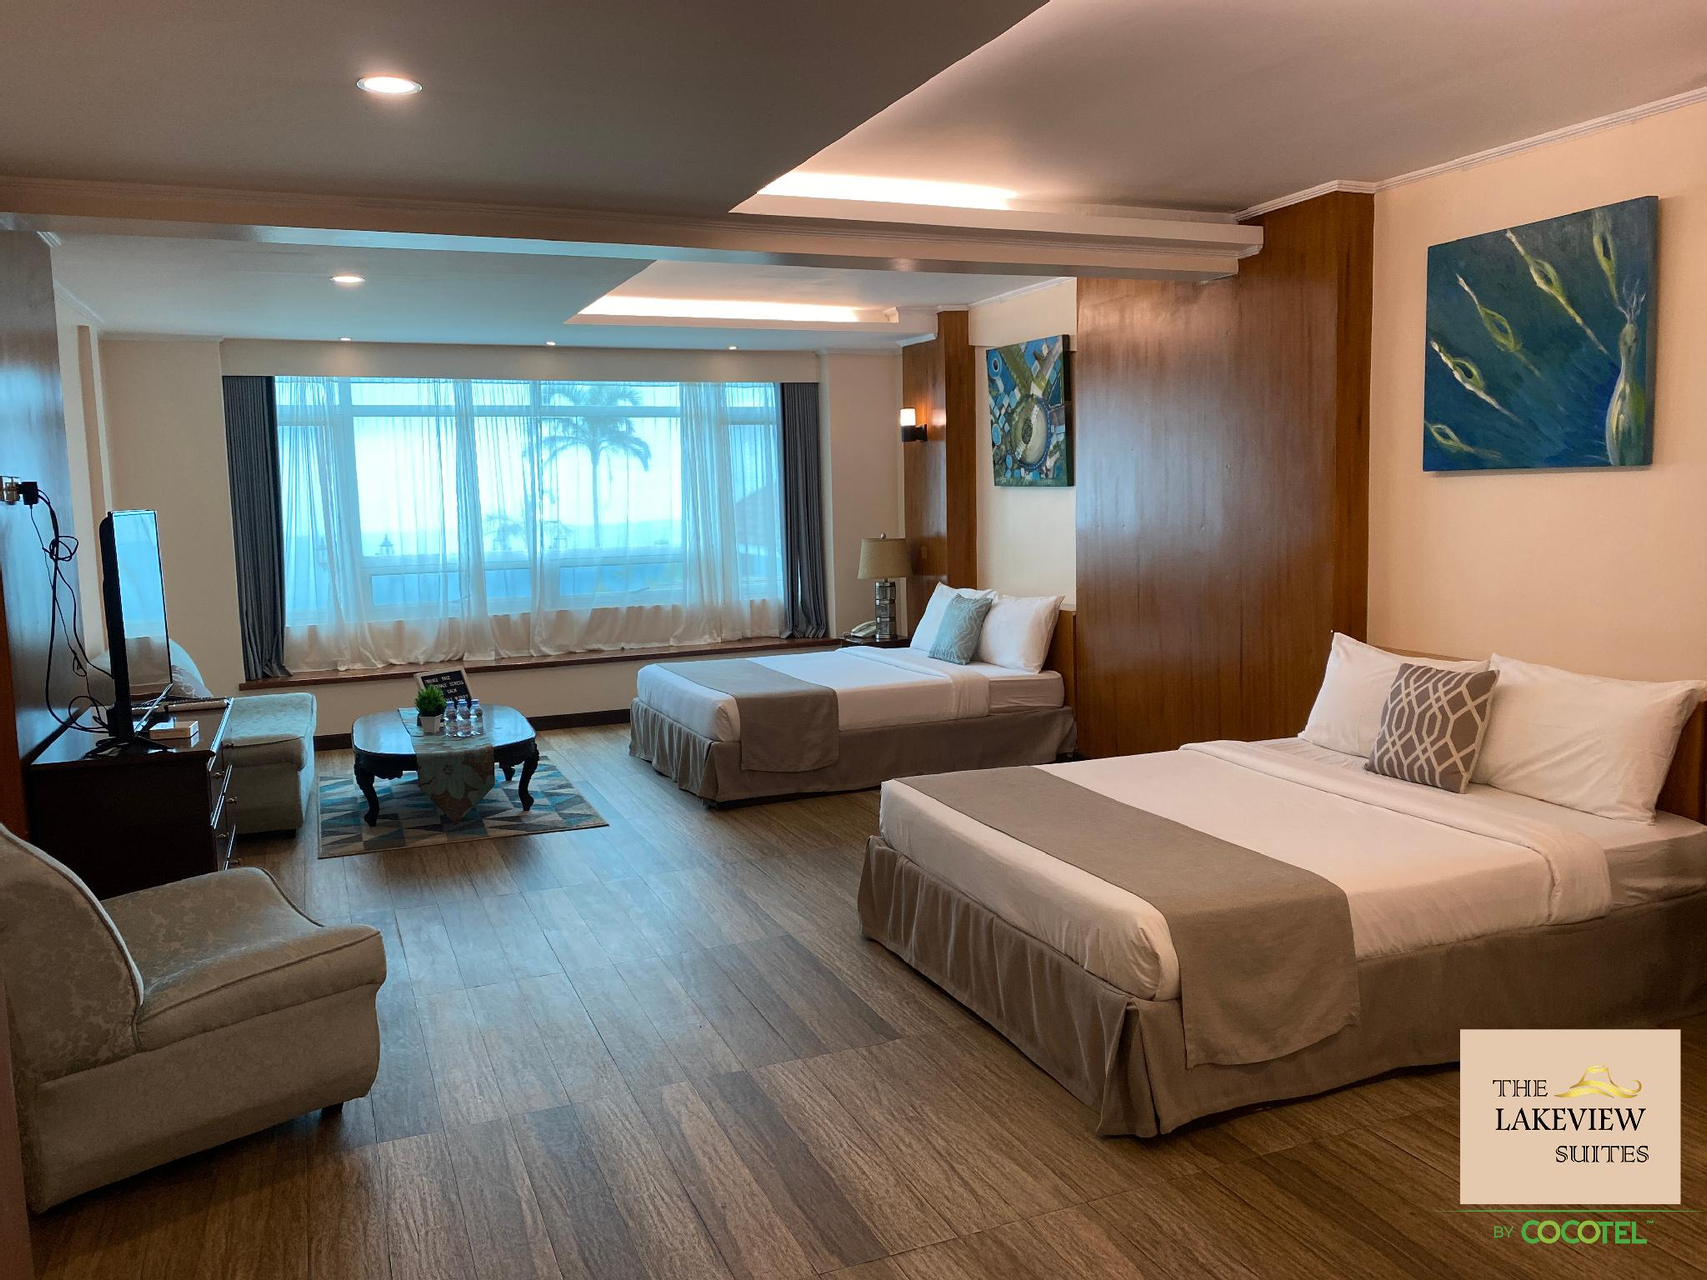 Bedroom 2, The Lakeview Suites by Cocotel, Tagaytay City